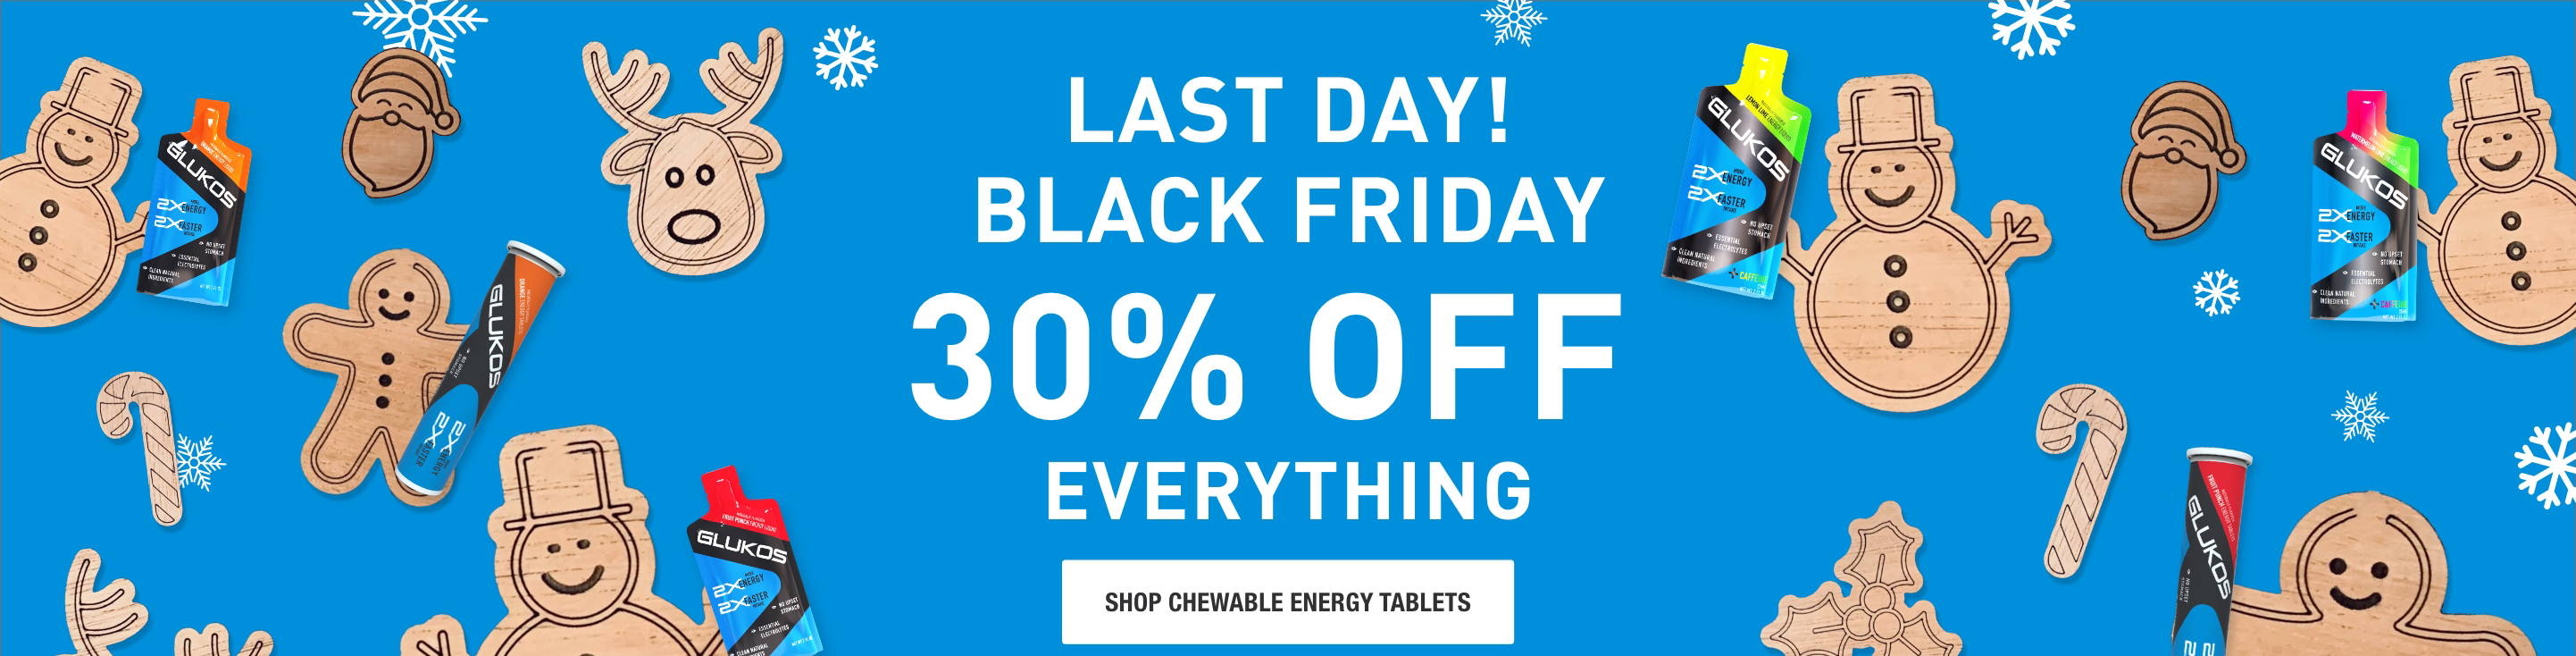 Last Day! Black Friday 30% Off Everything Shop Chewable Energy Tablets